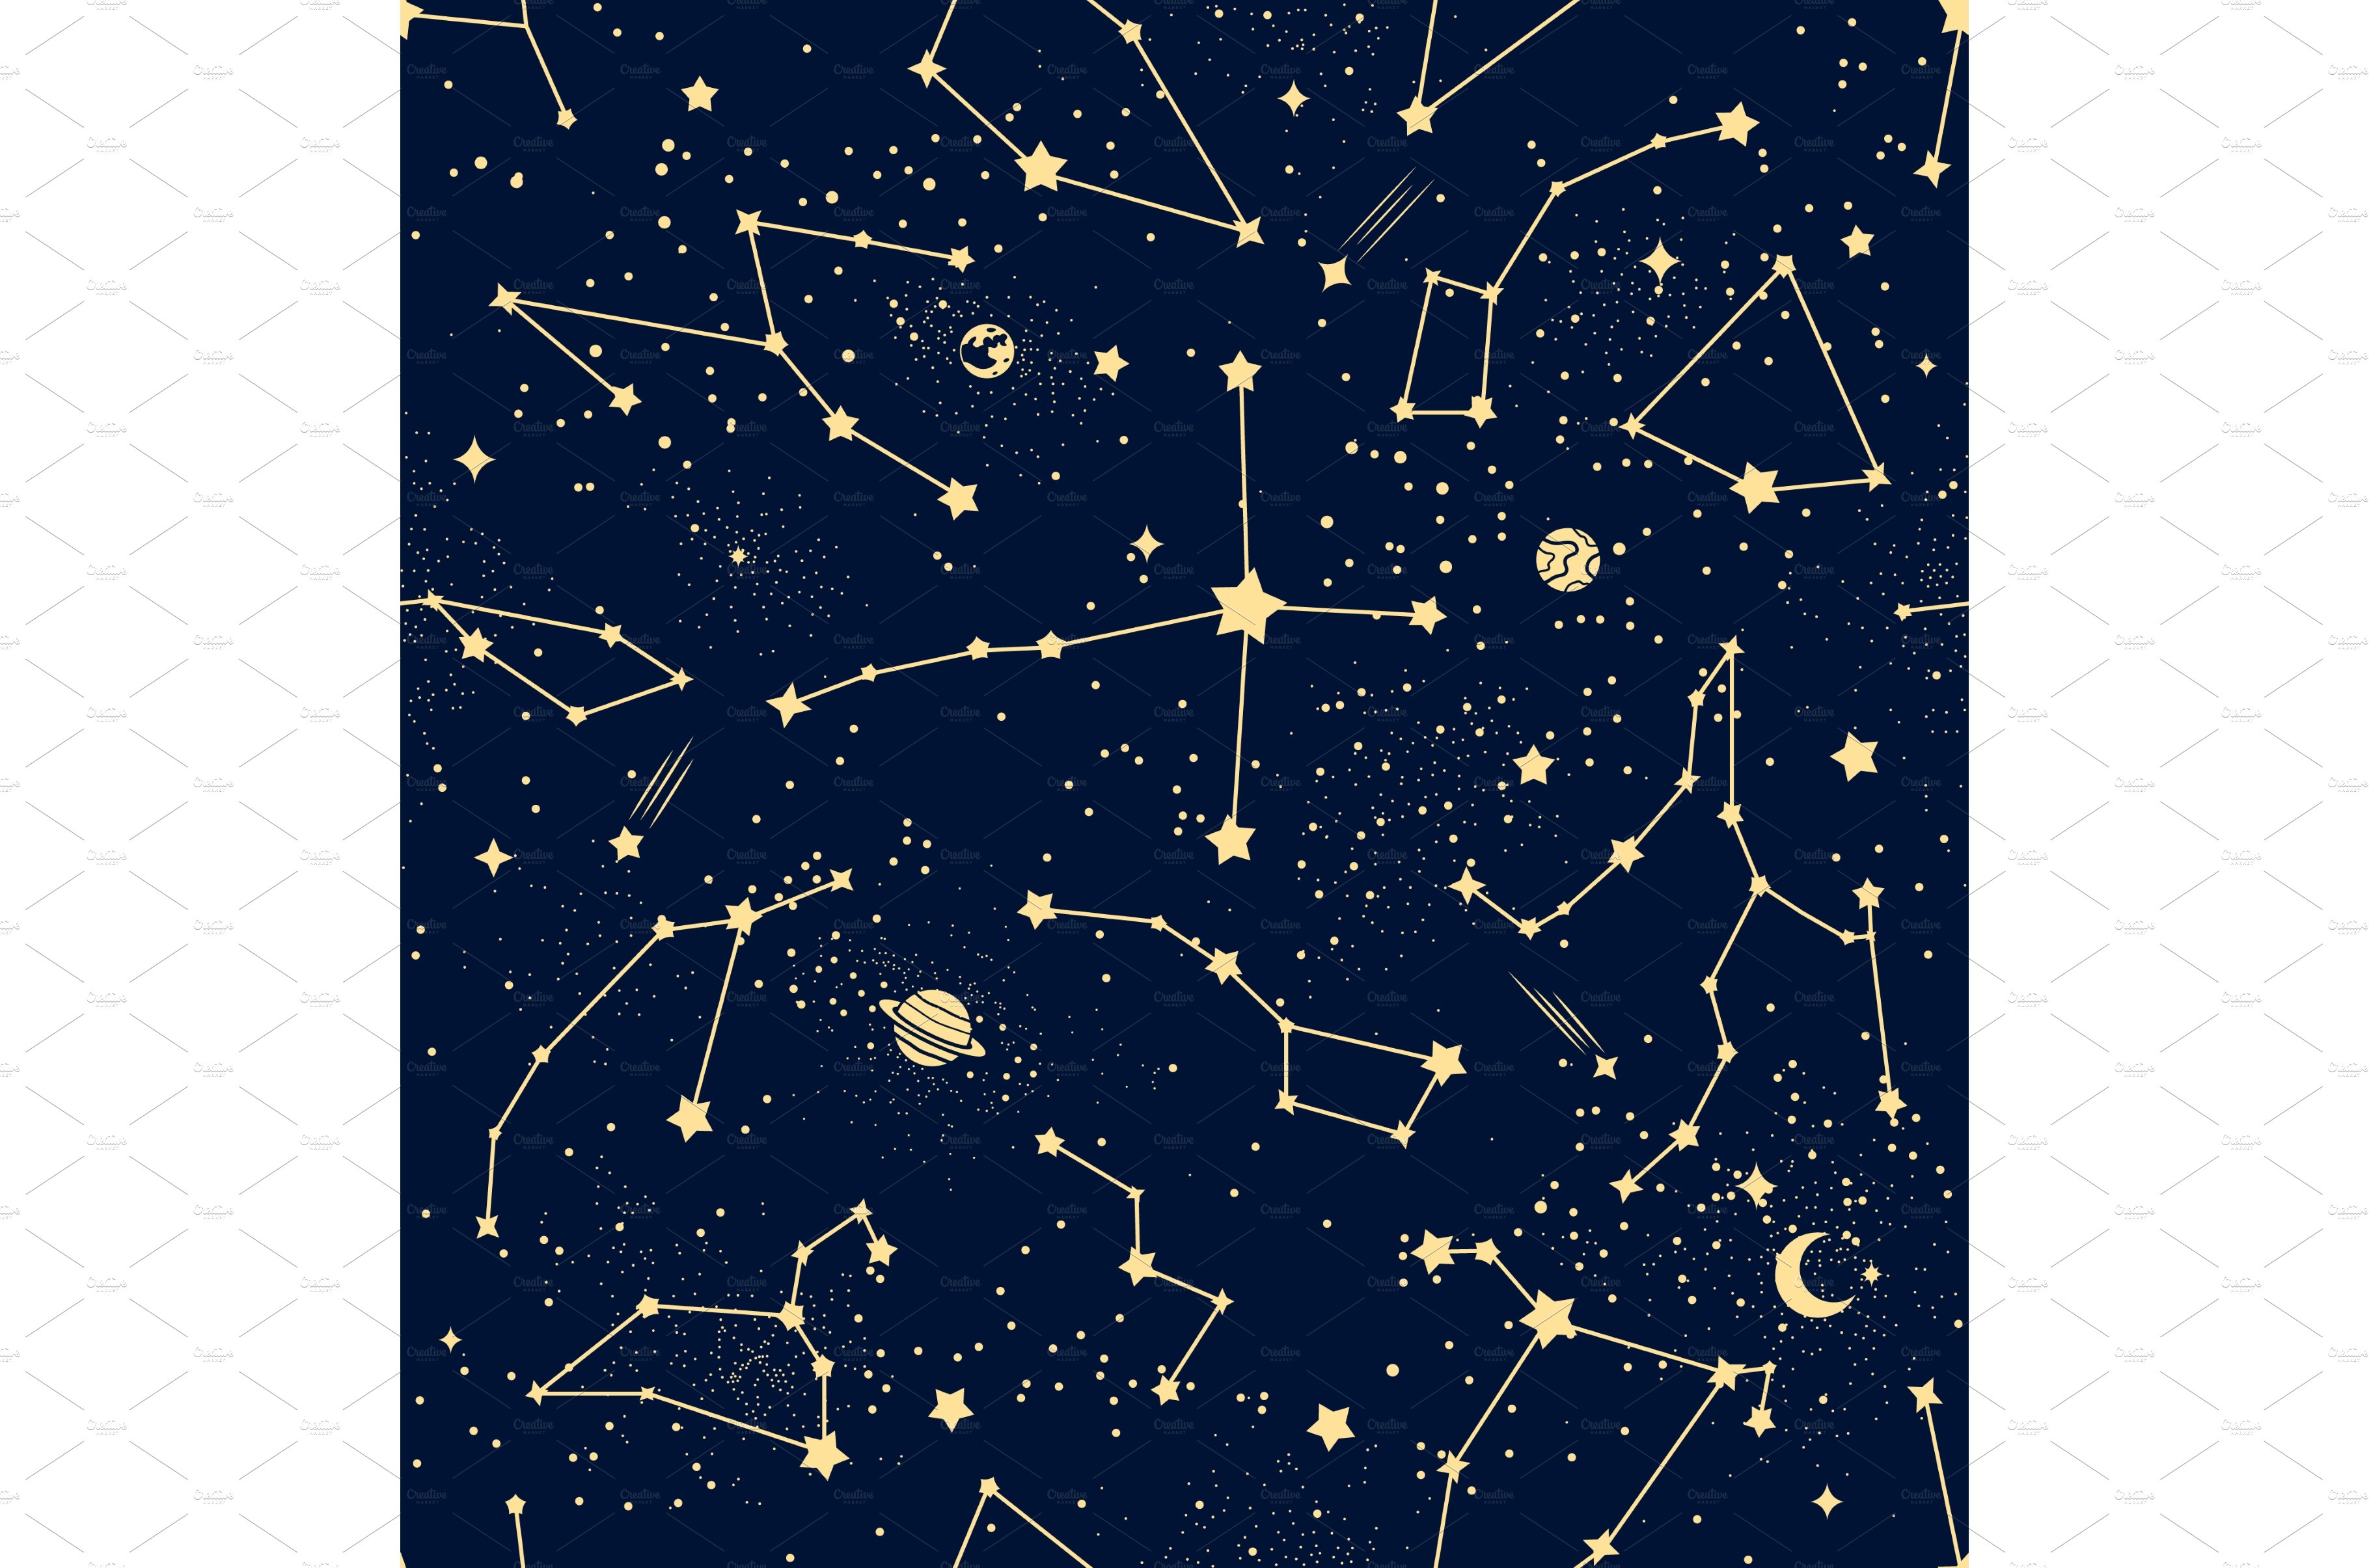 Constellation pattern sky with stars cover image.